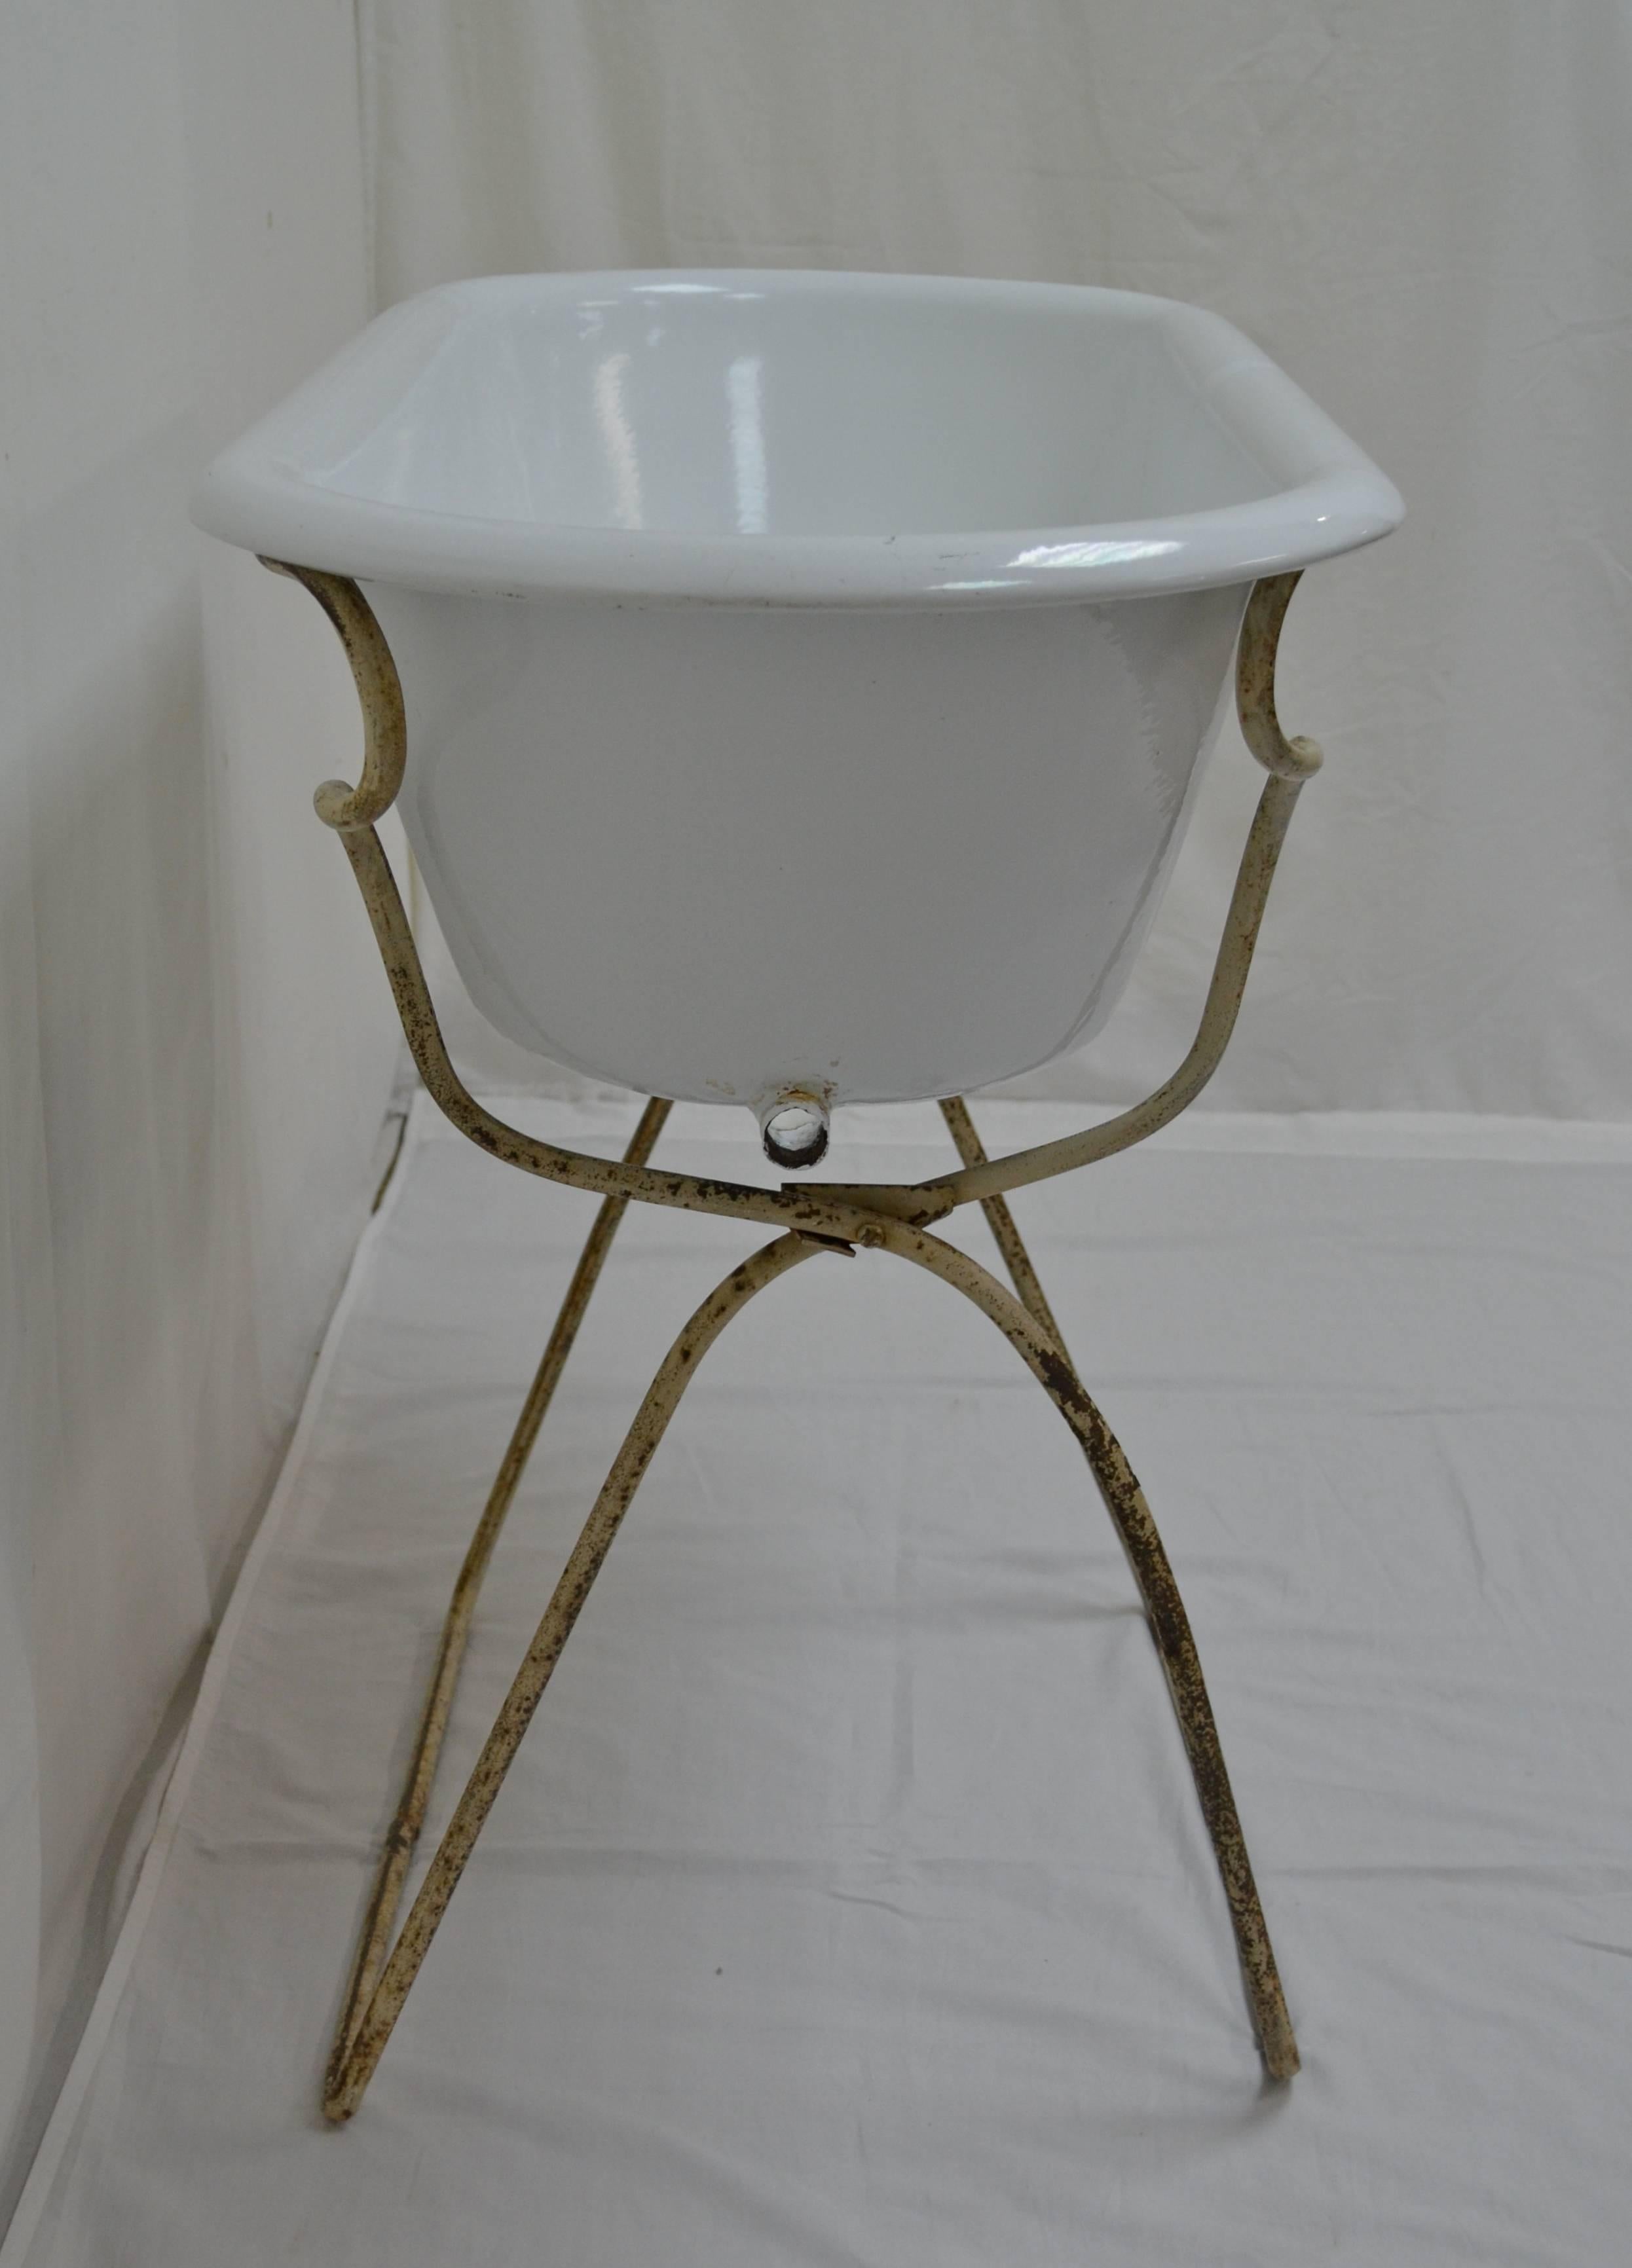 hungarian baby bathtub with stand